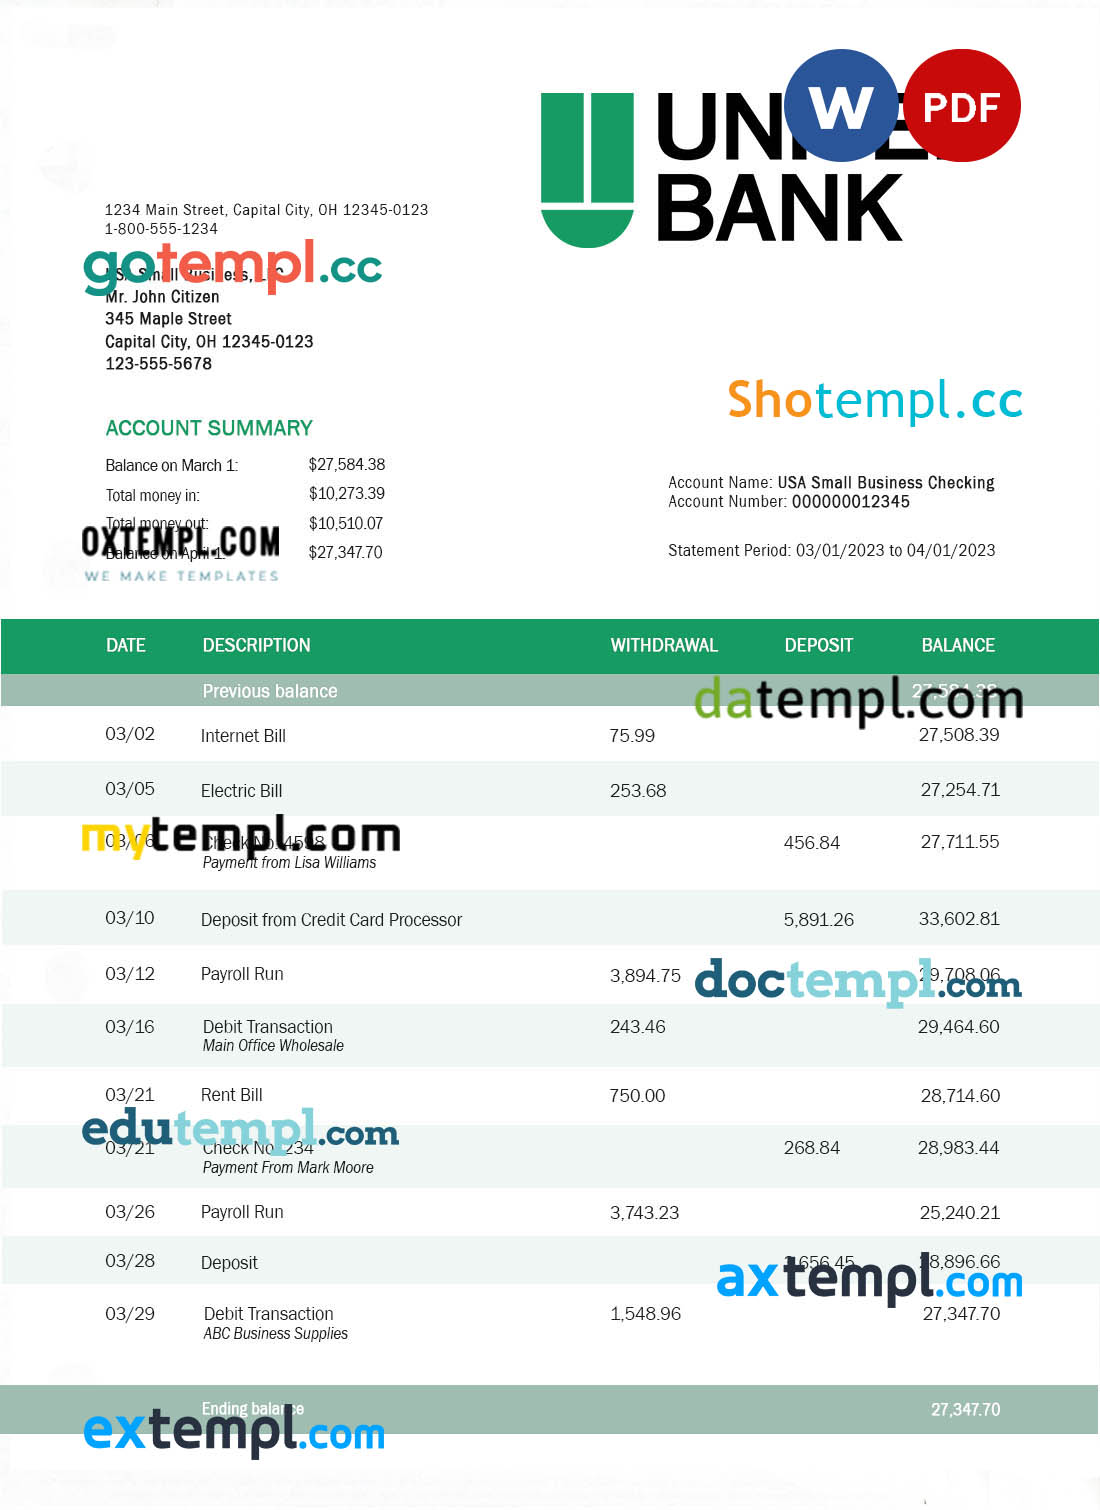 Freelance Service Invoice template in word and pdf format